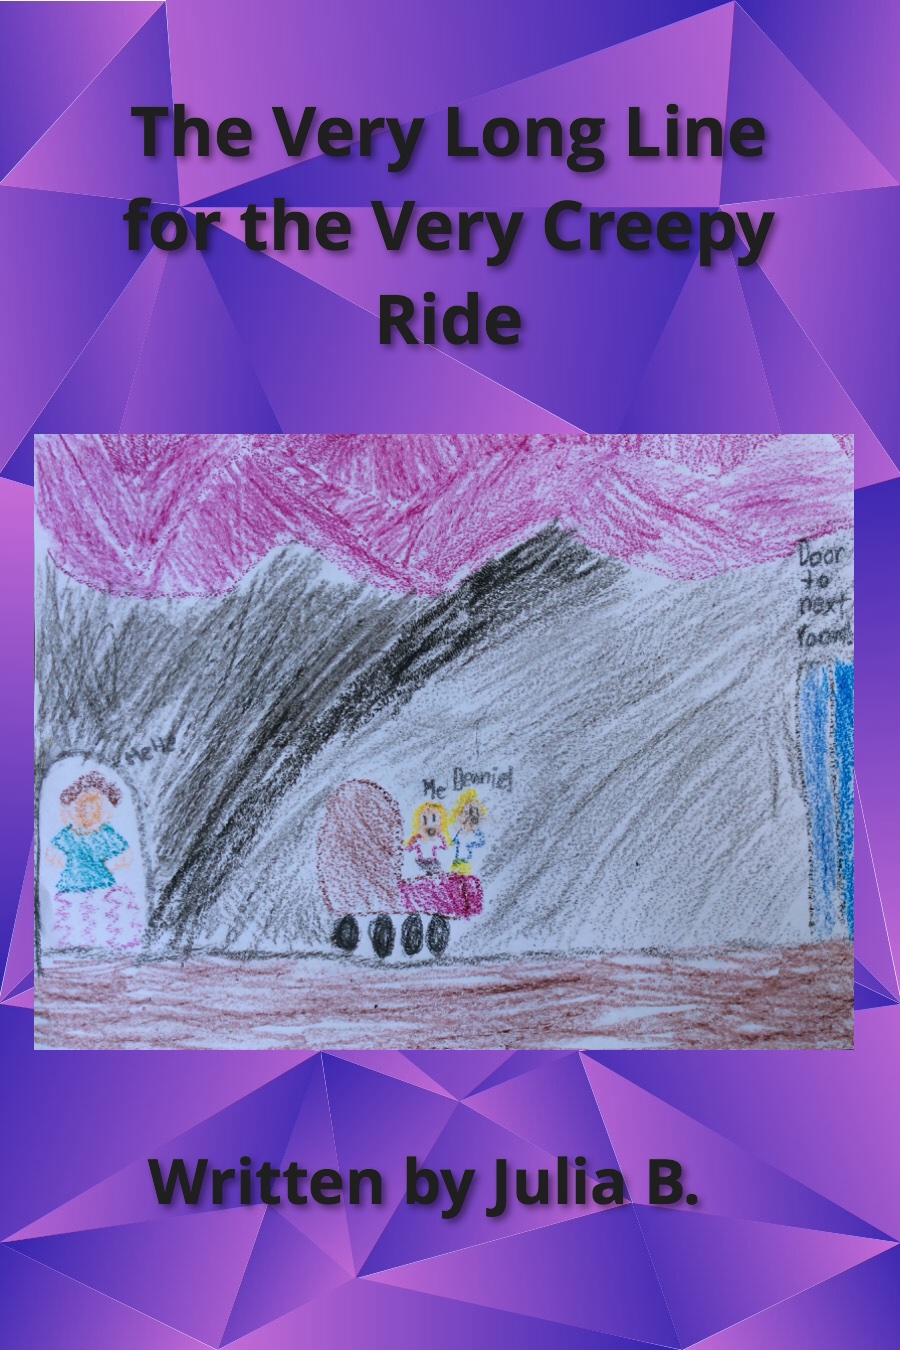 The Very Long Line for the Very Creepy Ride by Julia B